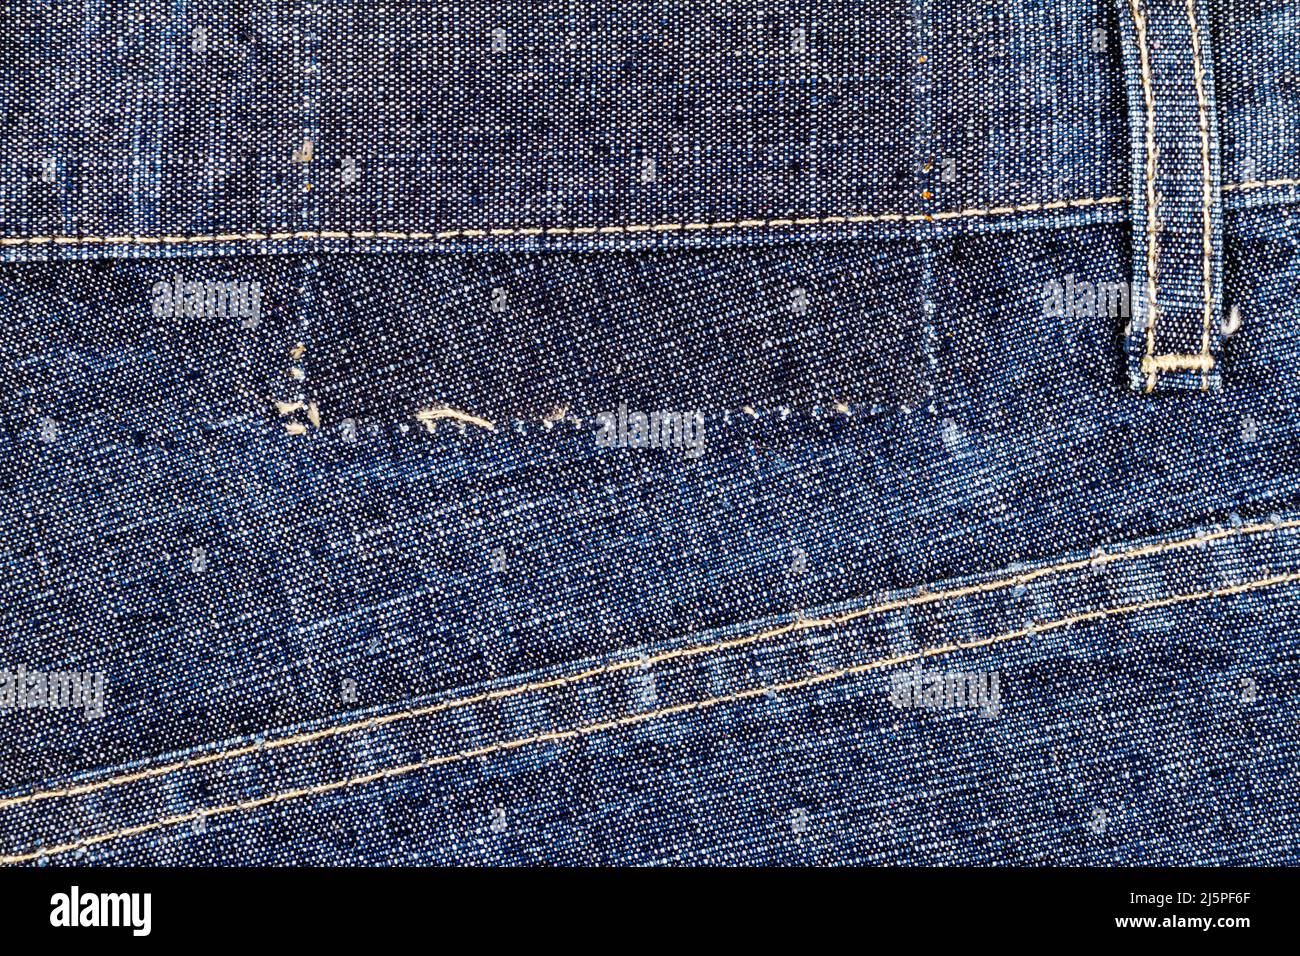 Worn blue denim jeans texture with stitch. Abstract jeans texture background Stock Photo